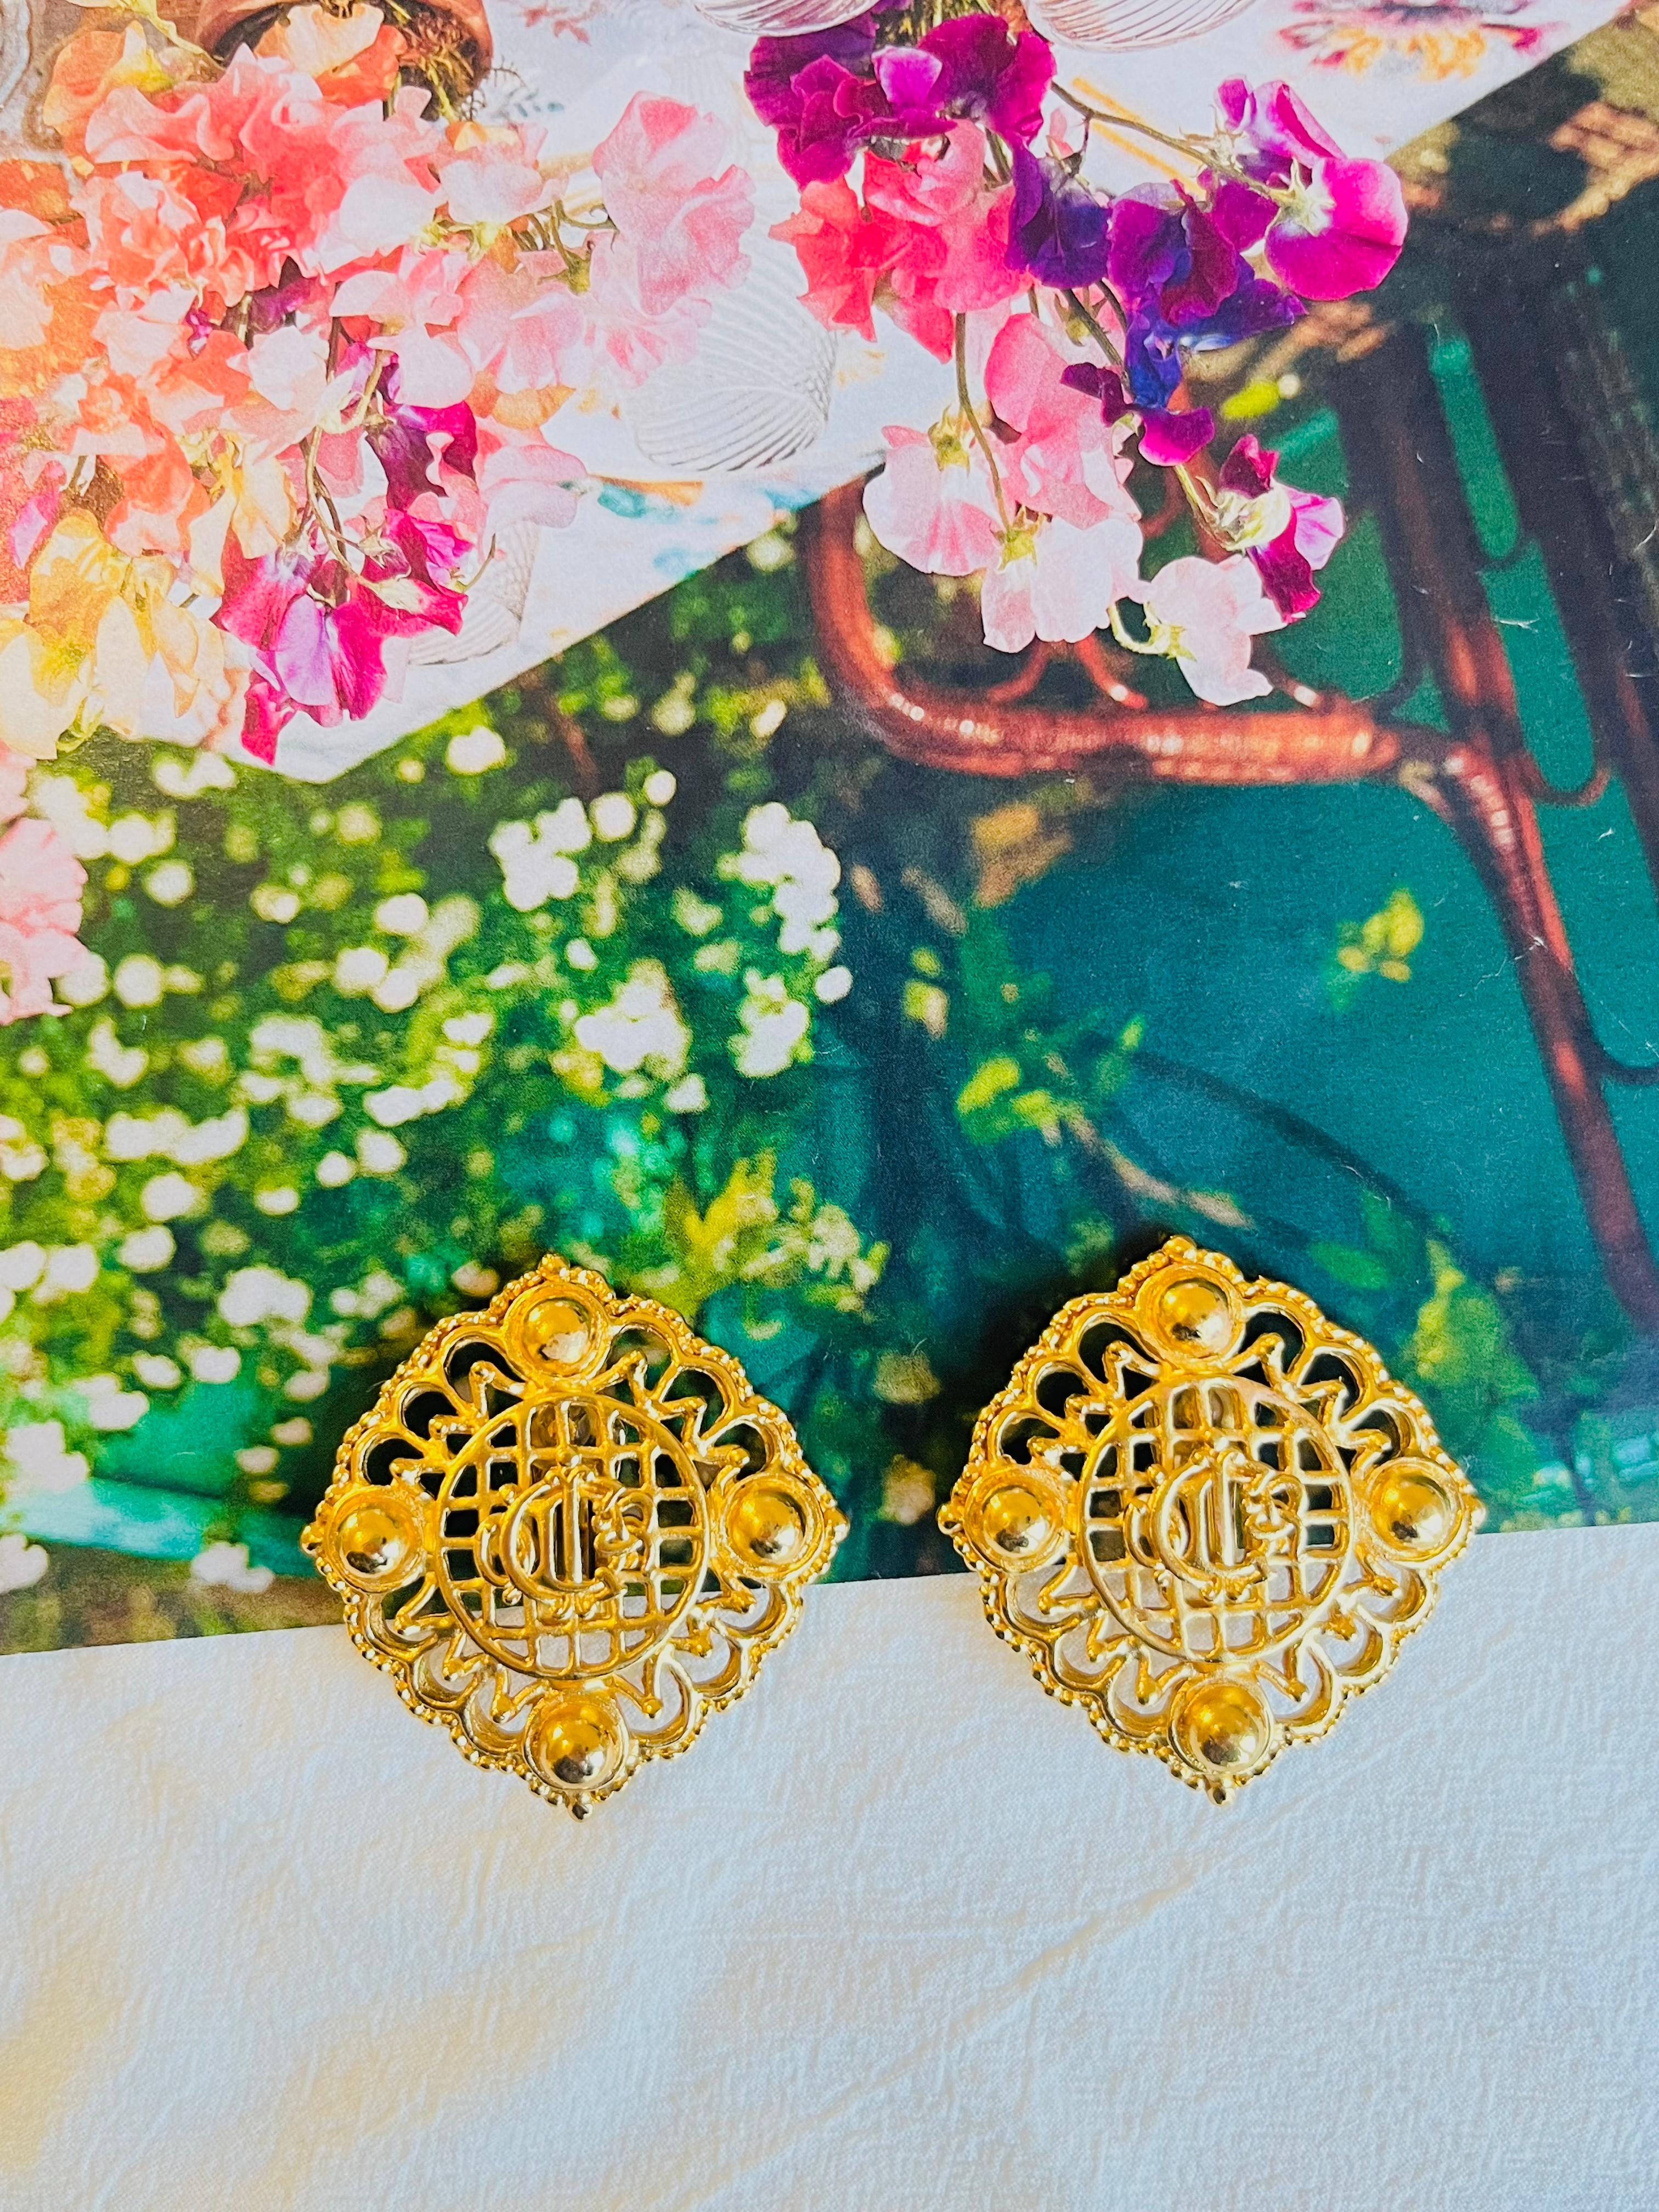 Christian Dior 1980s Vintage Large Monogram Insignia Crest Openwork Earrings In Excellent Condition For Sale In Wokingham, England